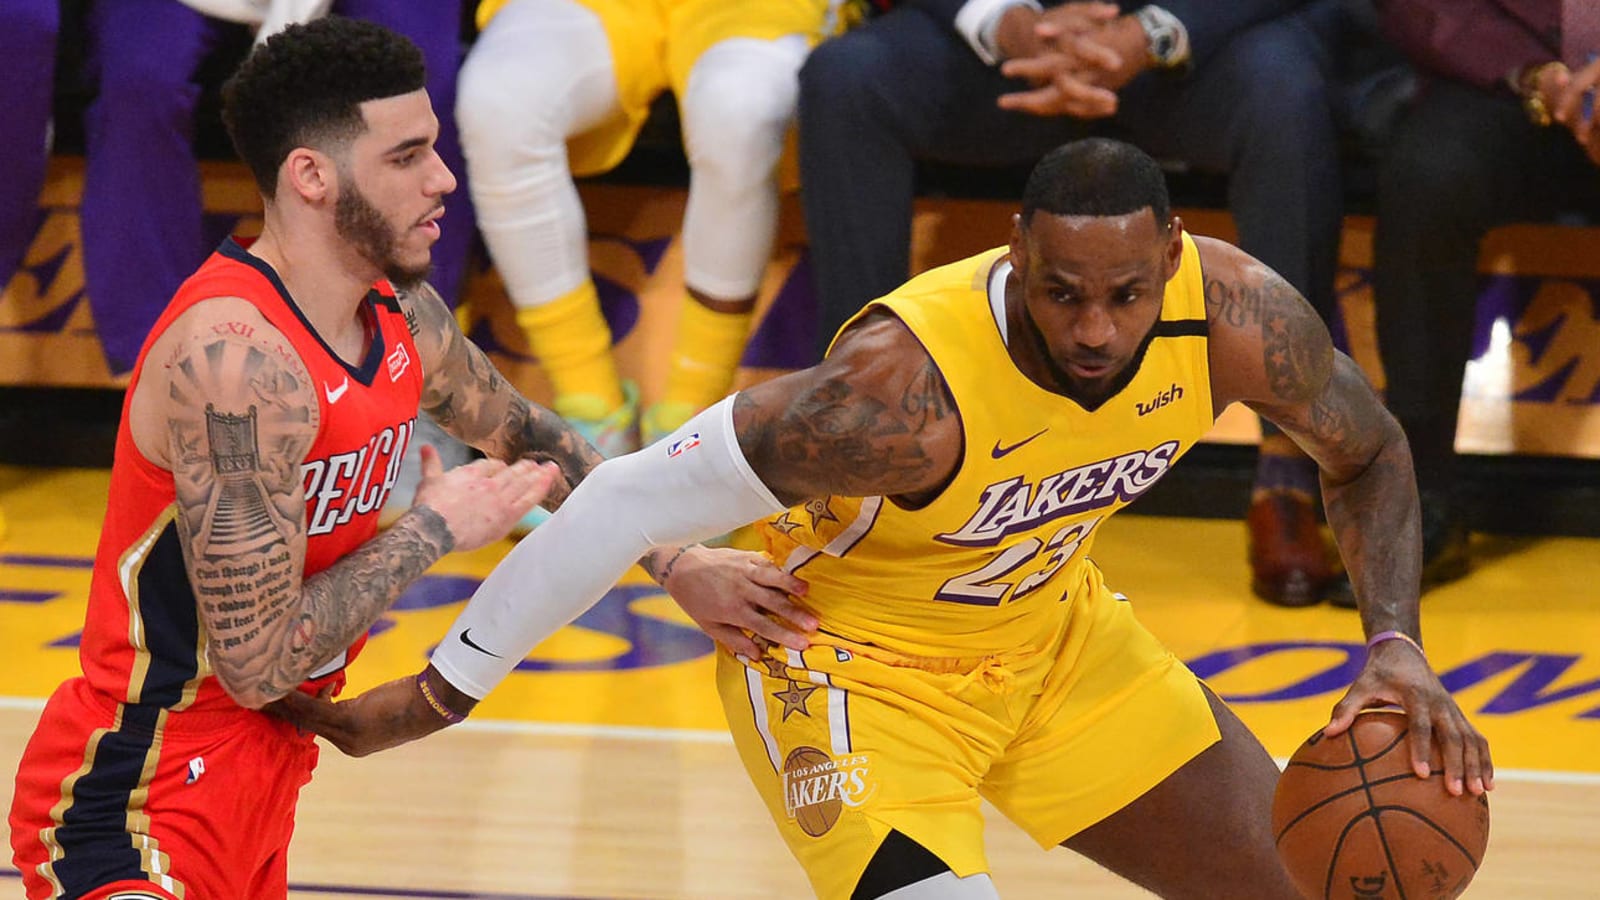 LeBron James, Lonzo Ball spark speculation with tweets